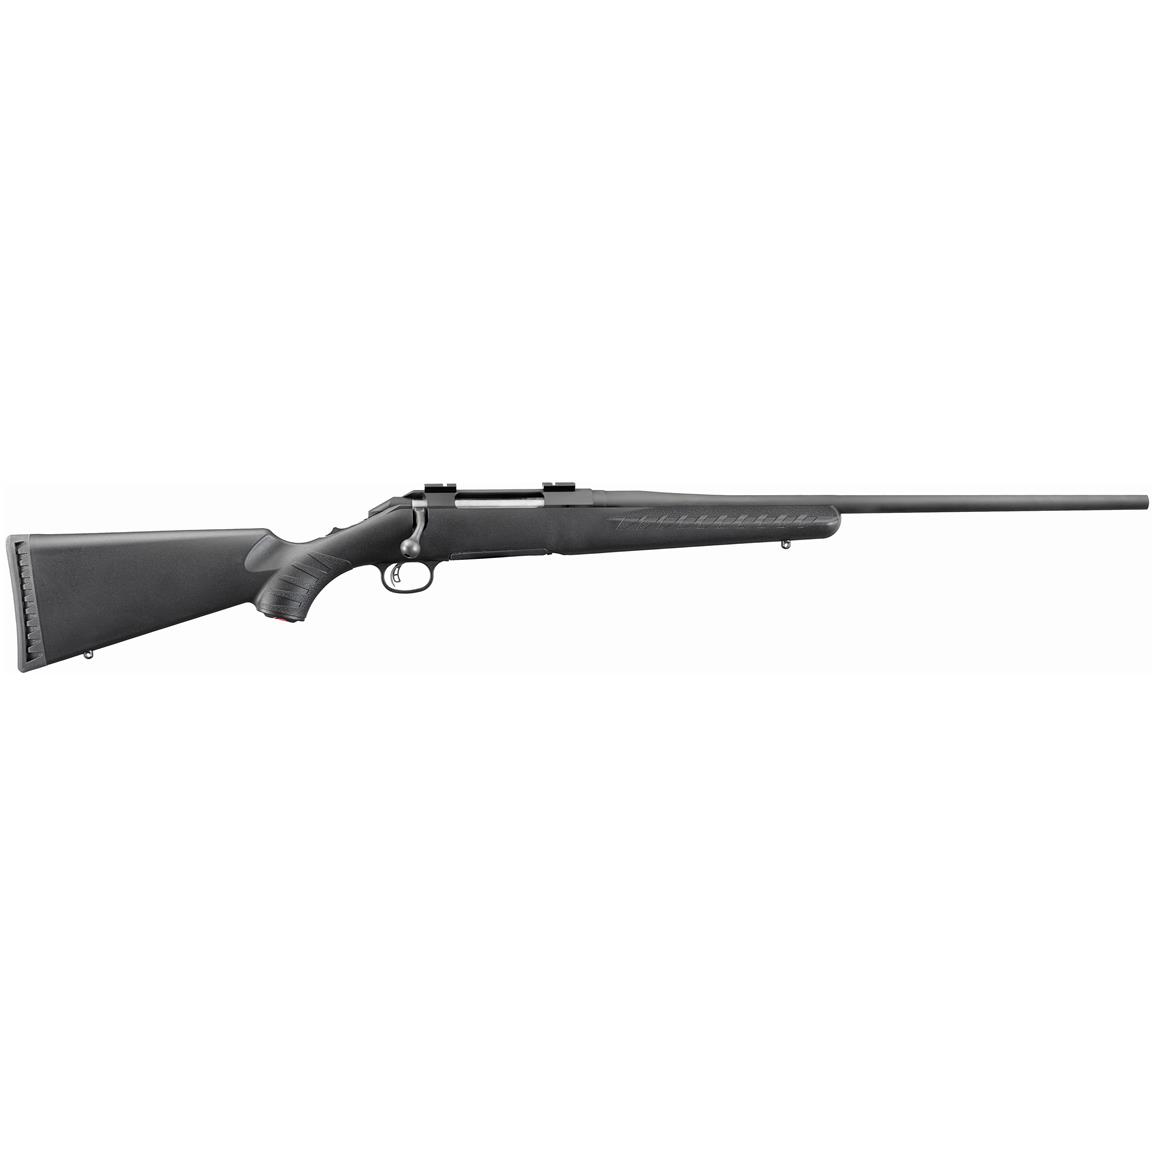 Ruger American Rifle, Bolt Action, .30-06 Springfield, 22" Barrel, 4+1 Rounds